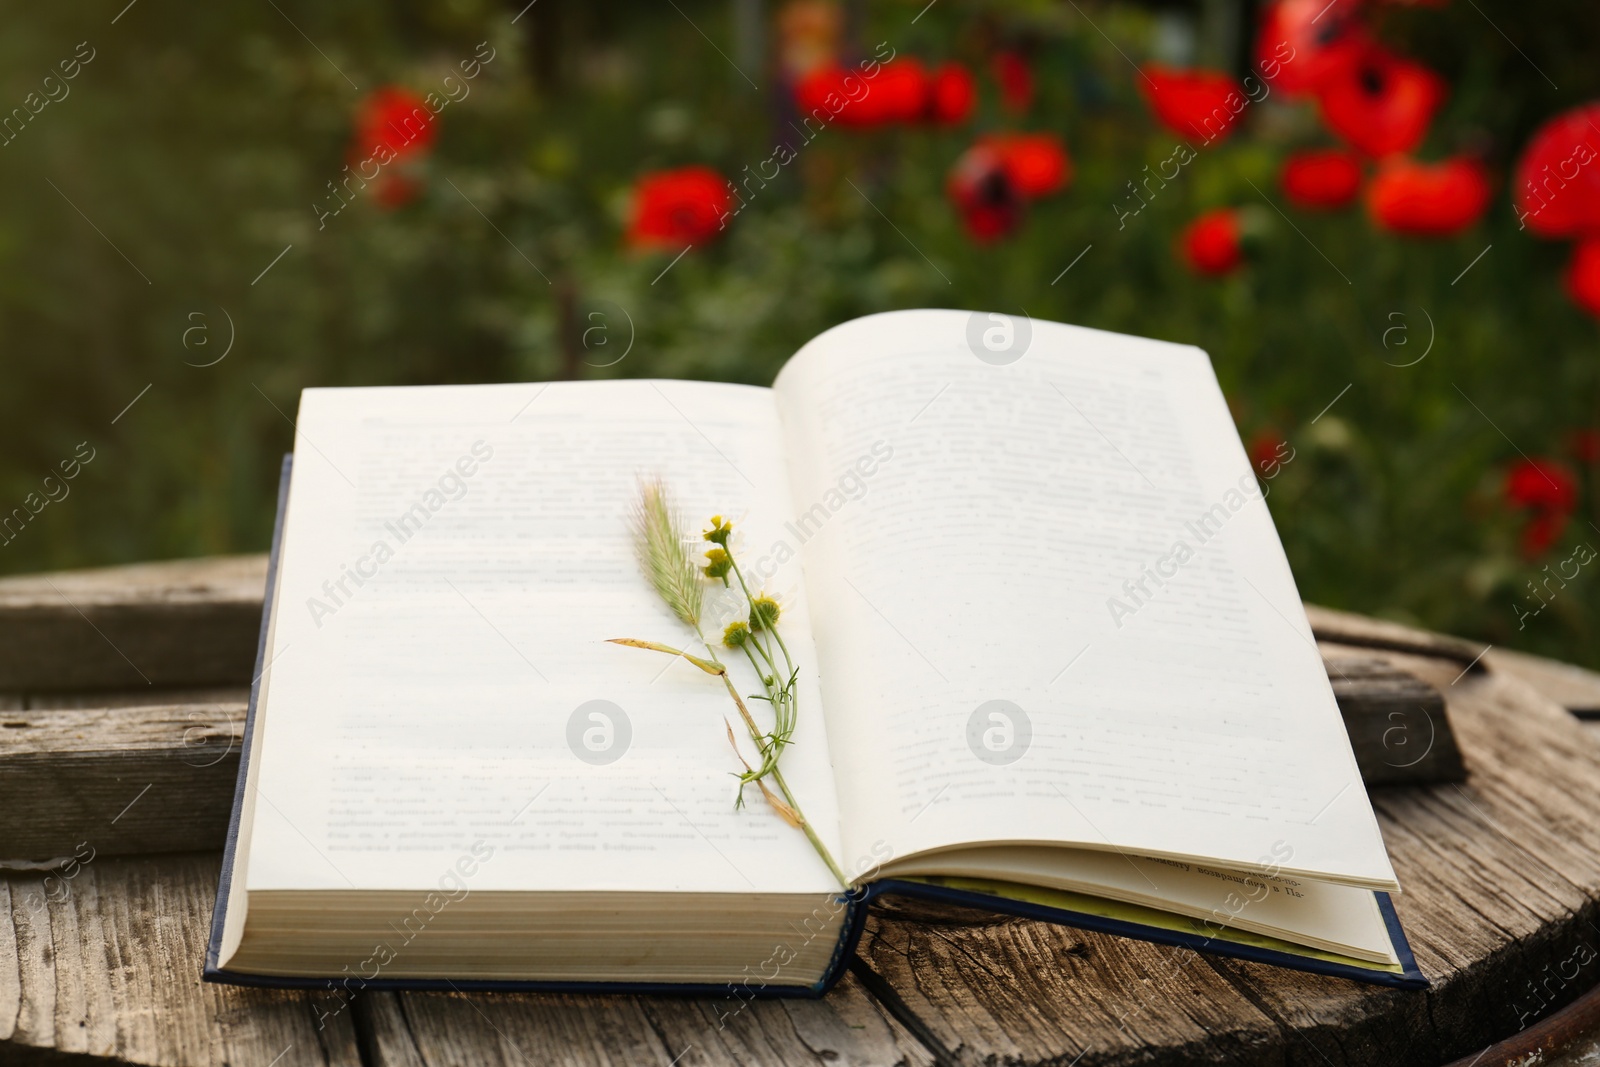 Photo of Open book with spike and chamomile flowers on wooden table outdoors